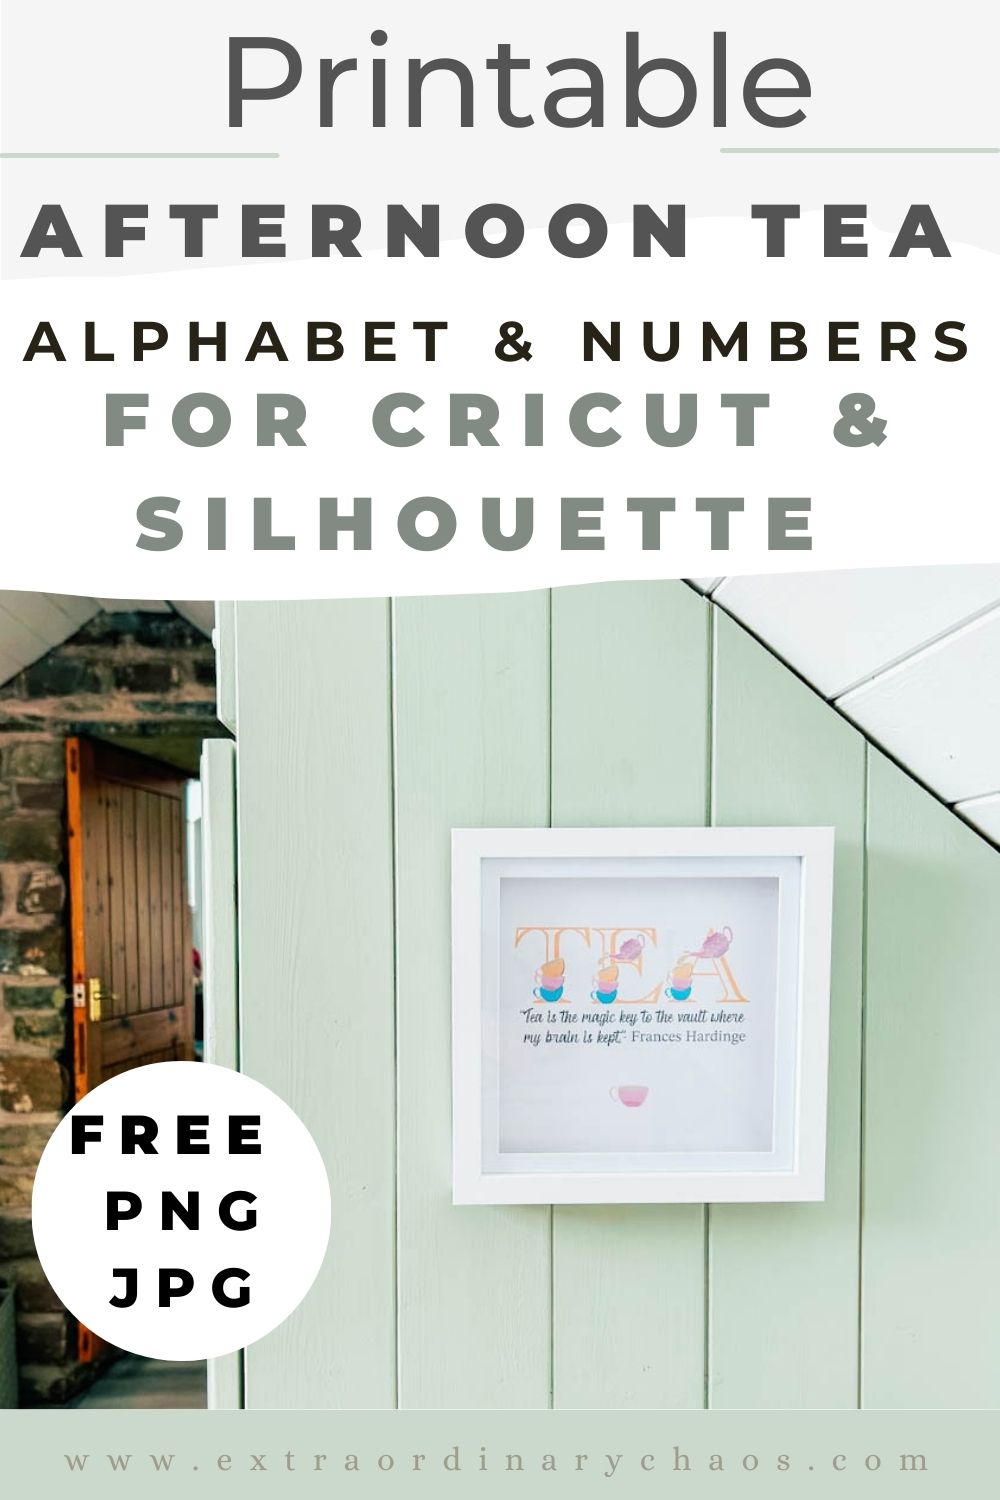 Free printable afternoon tea alphabet, jpg, png for Cricut or Silhouette